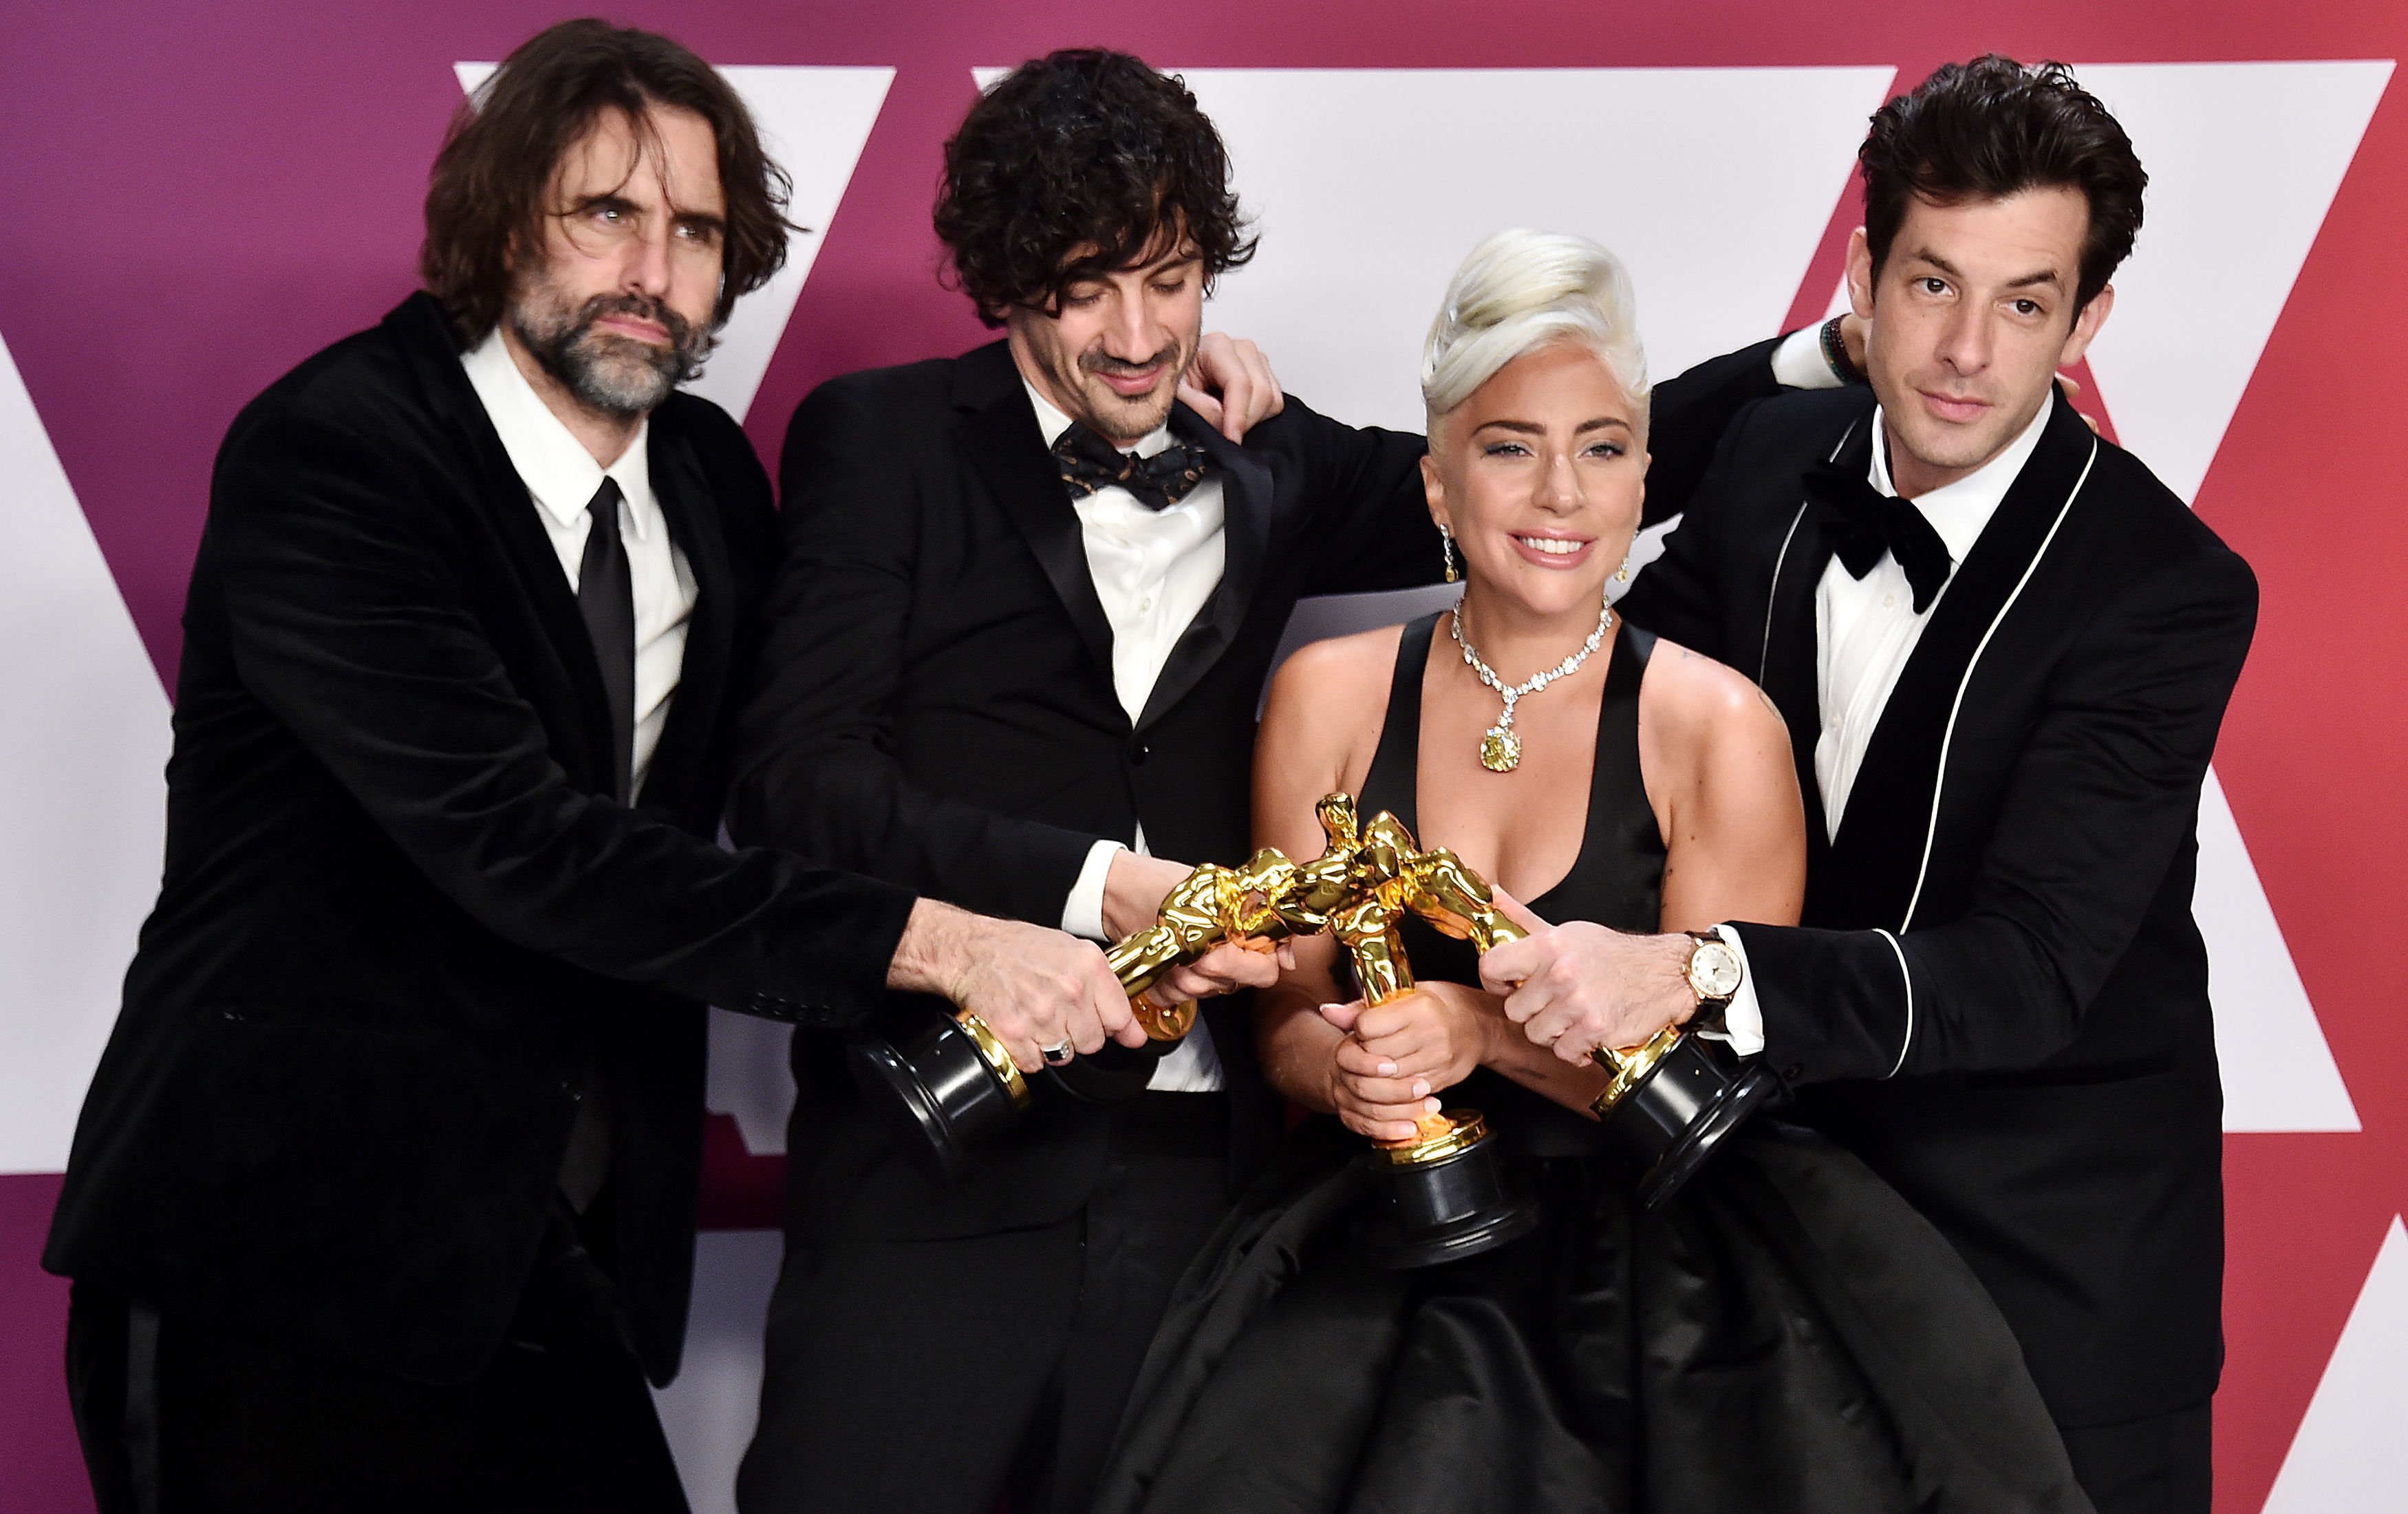 Andrew Wyatt, Anthony Rossomando, Mark Ronson and Lady Gaga, winners of Best Original Song for Shallow from A Star is Born.